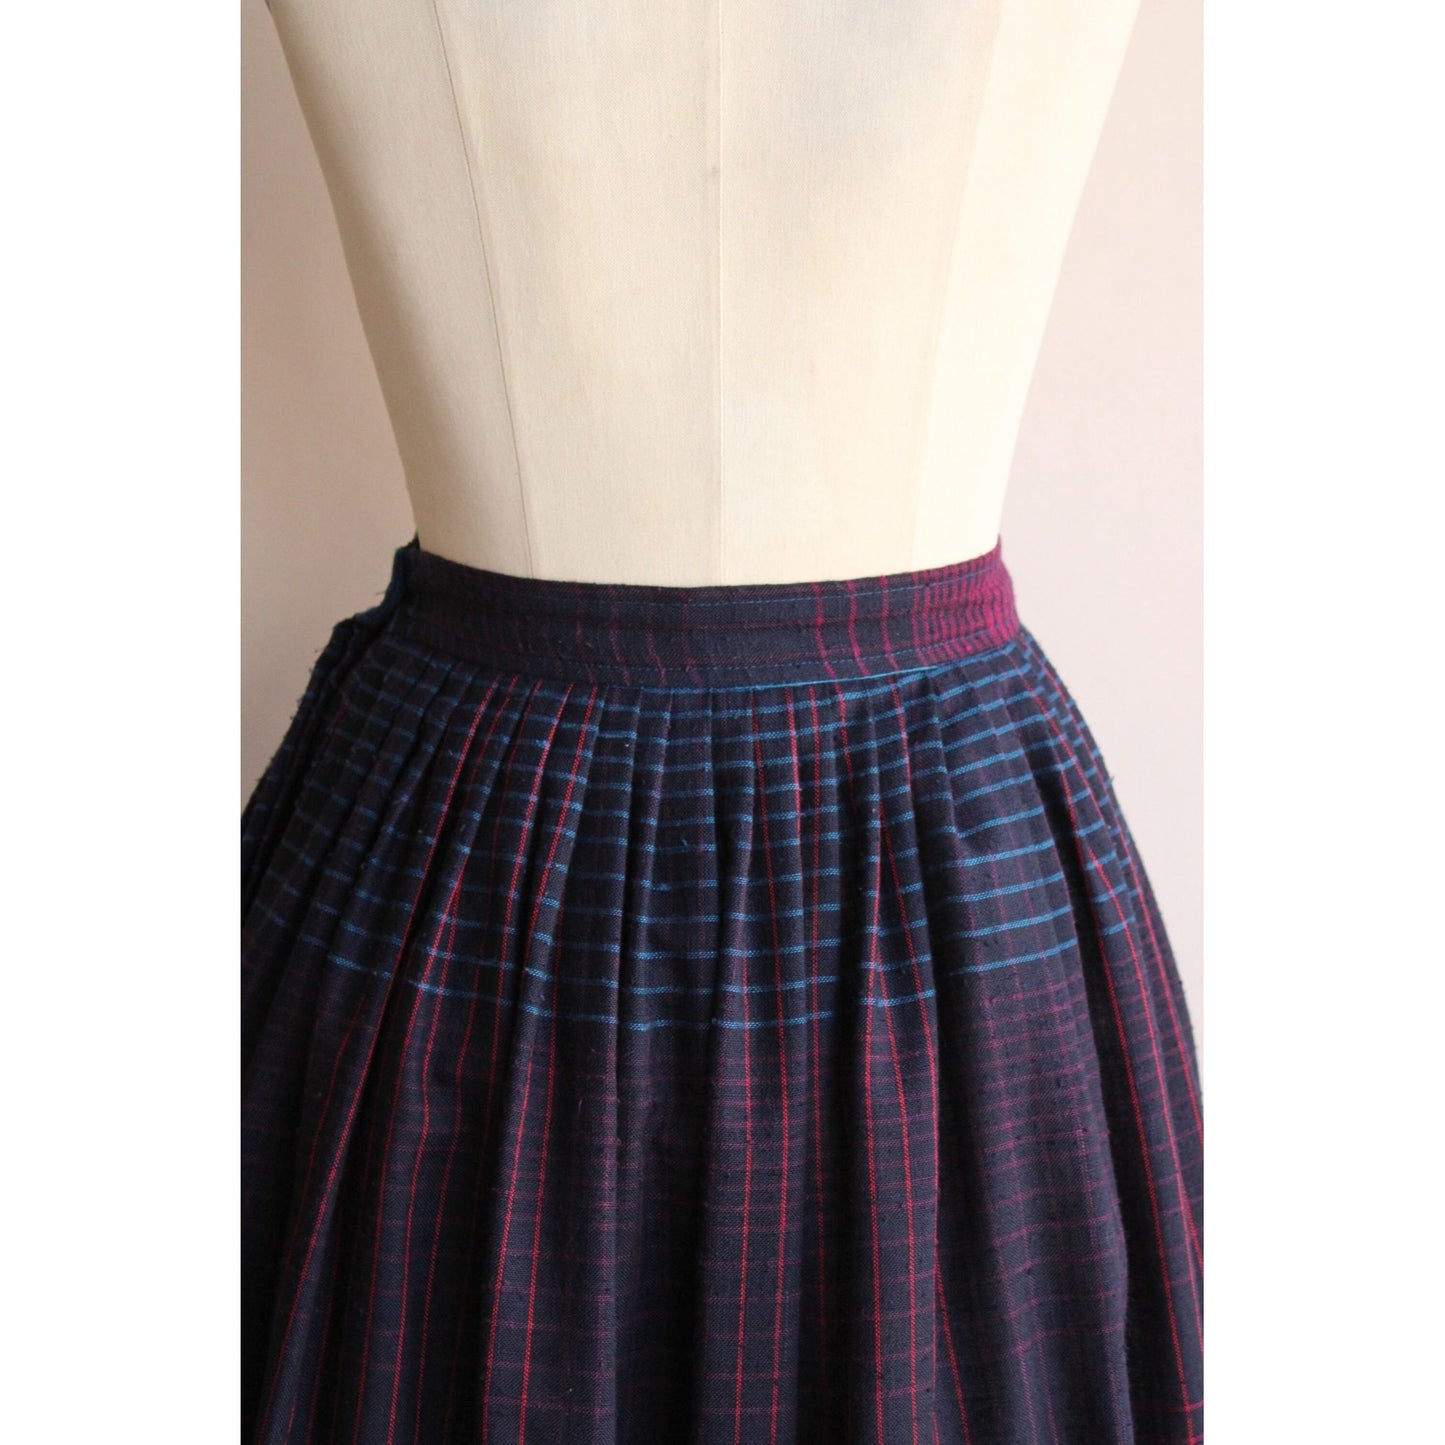 Vintage 1980s The Villager Plaid Check Pleated Full Skirt with Pocket